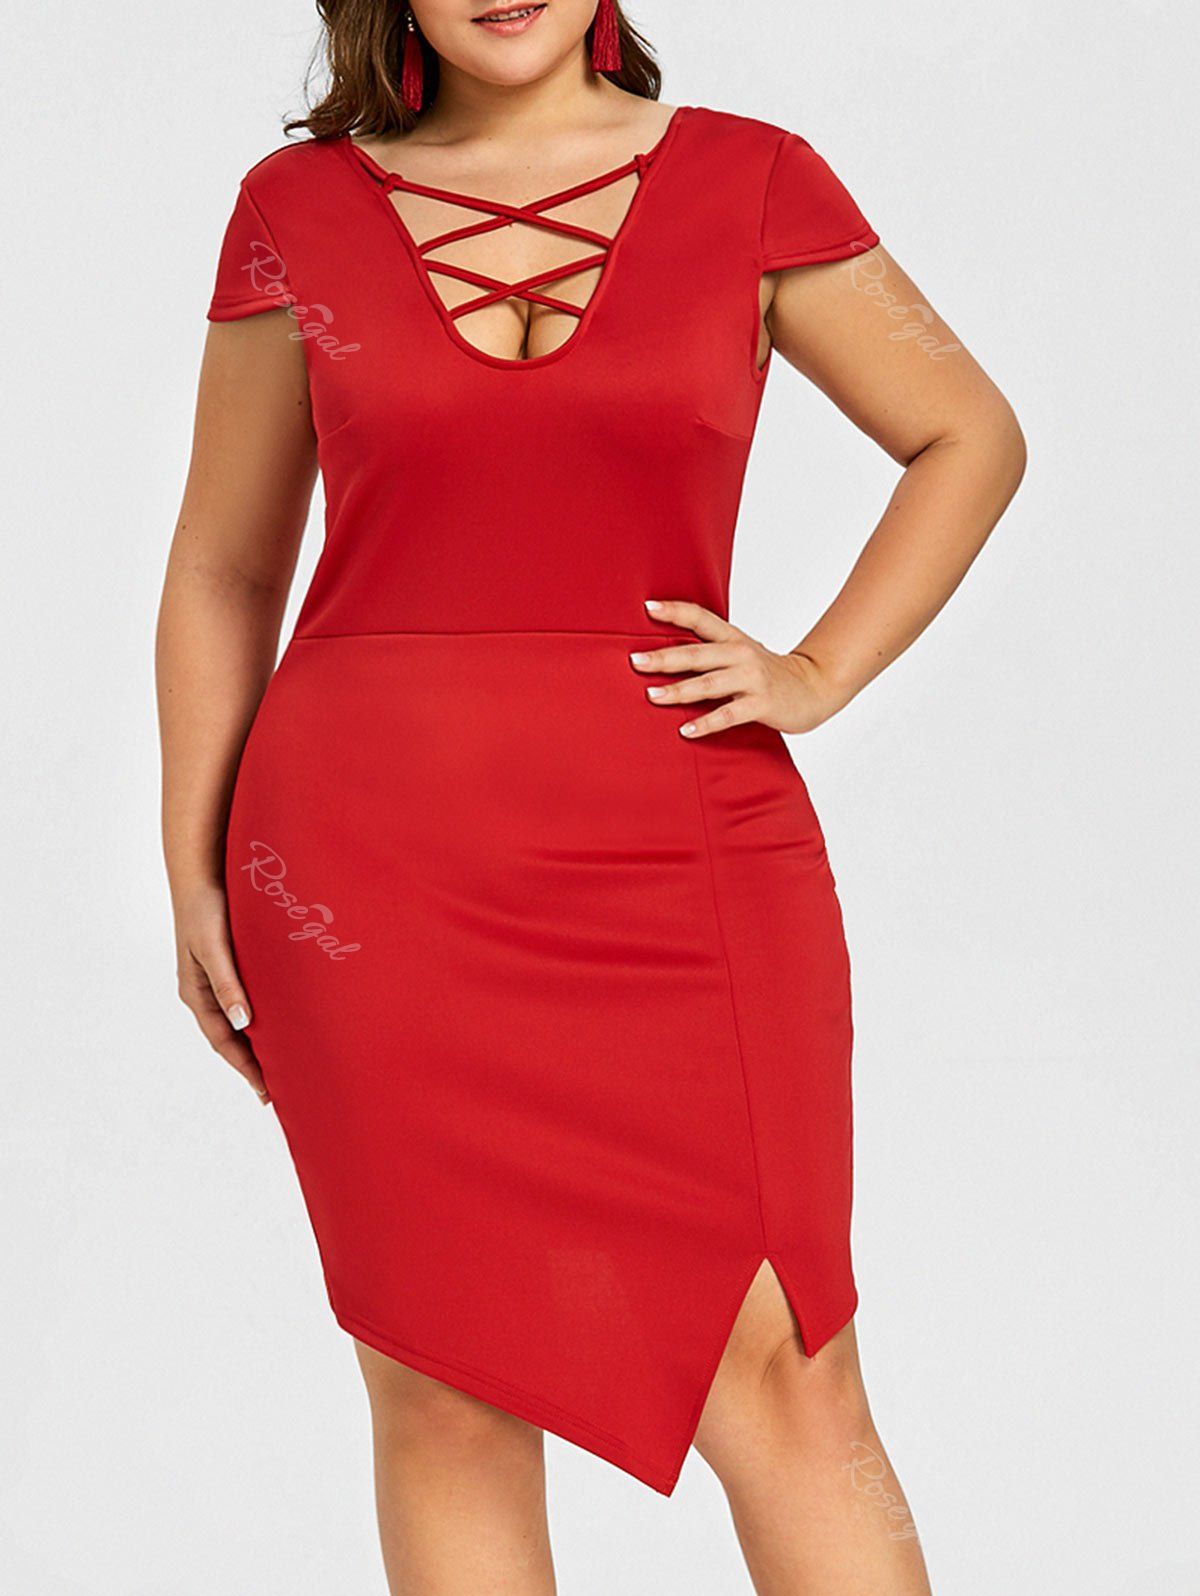 plus size night out clothing